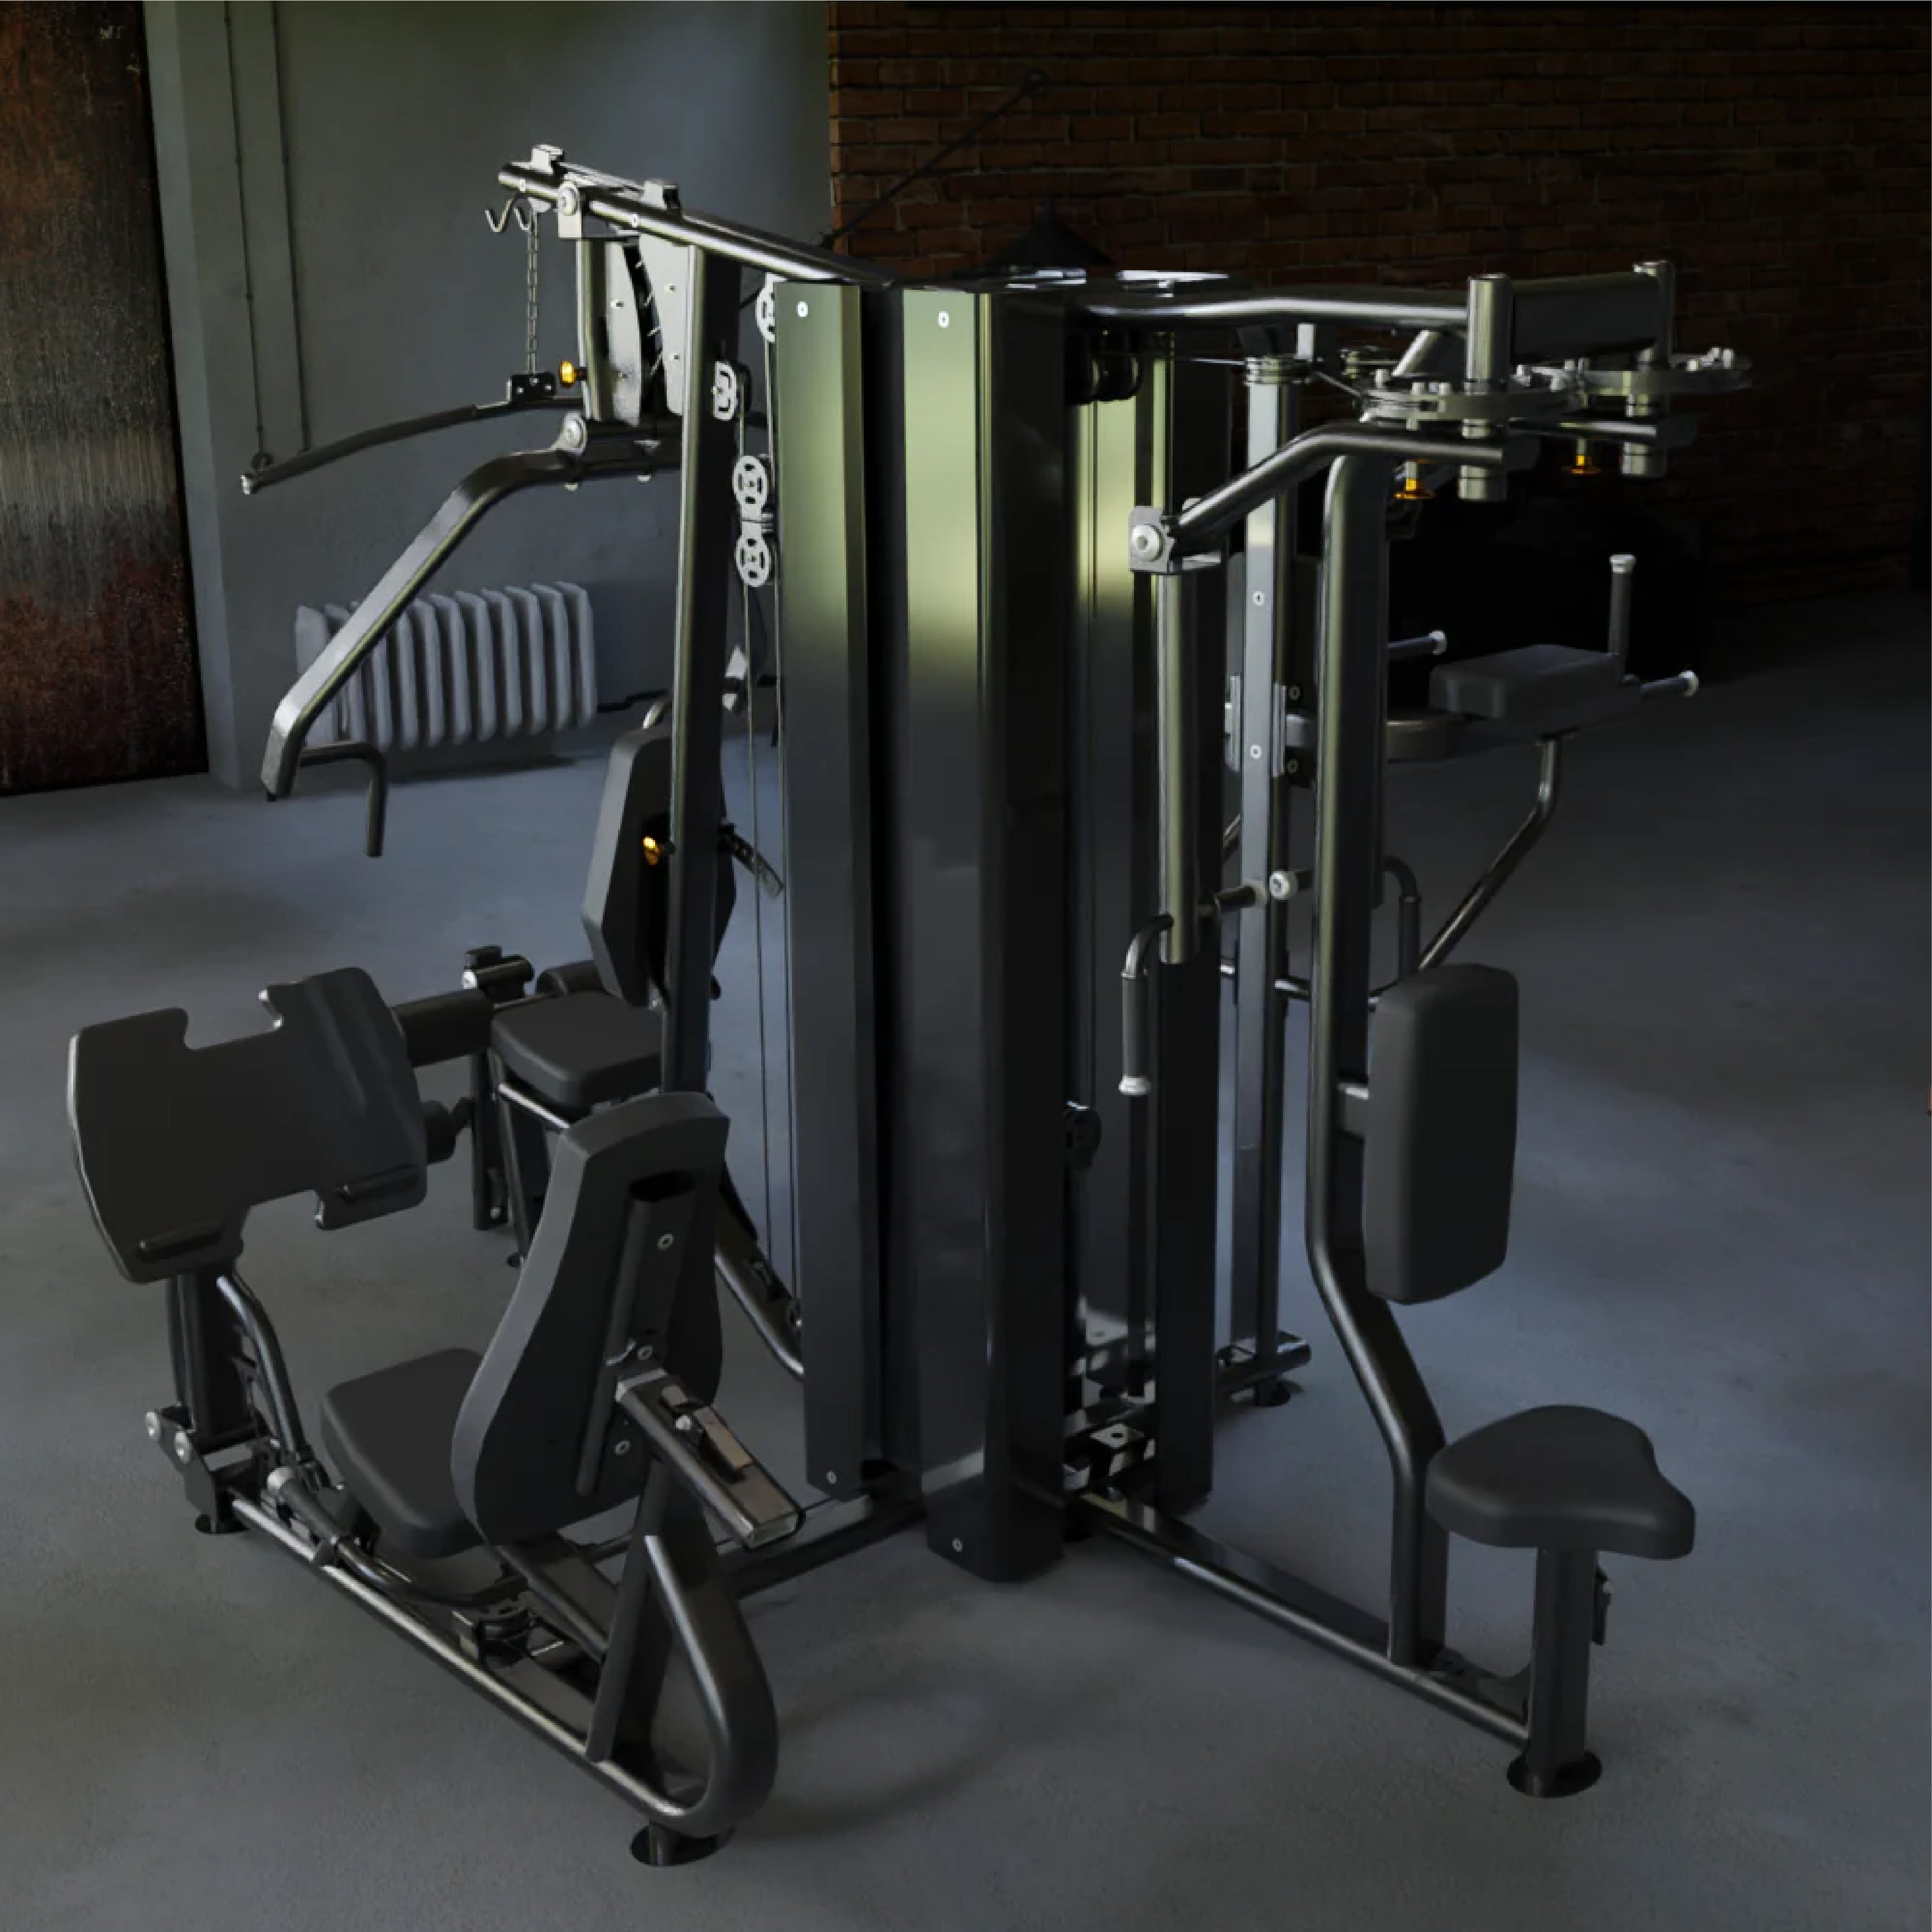 Bezwaar Stratford on Avon Brig Home Gyms for Sale Canada | Shop Online at The Treadmill Factory